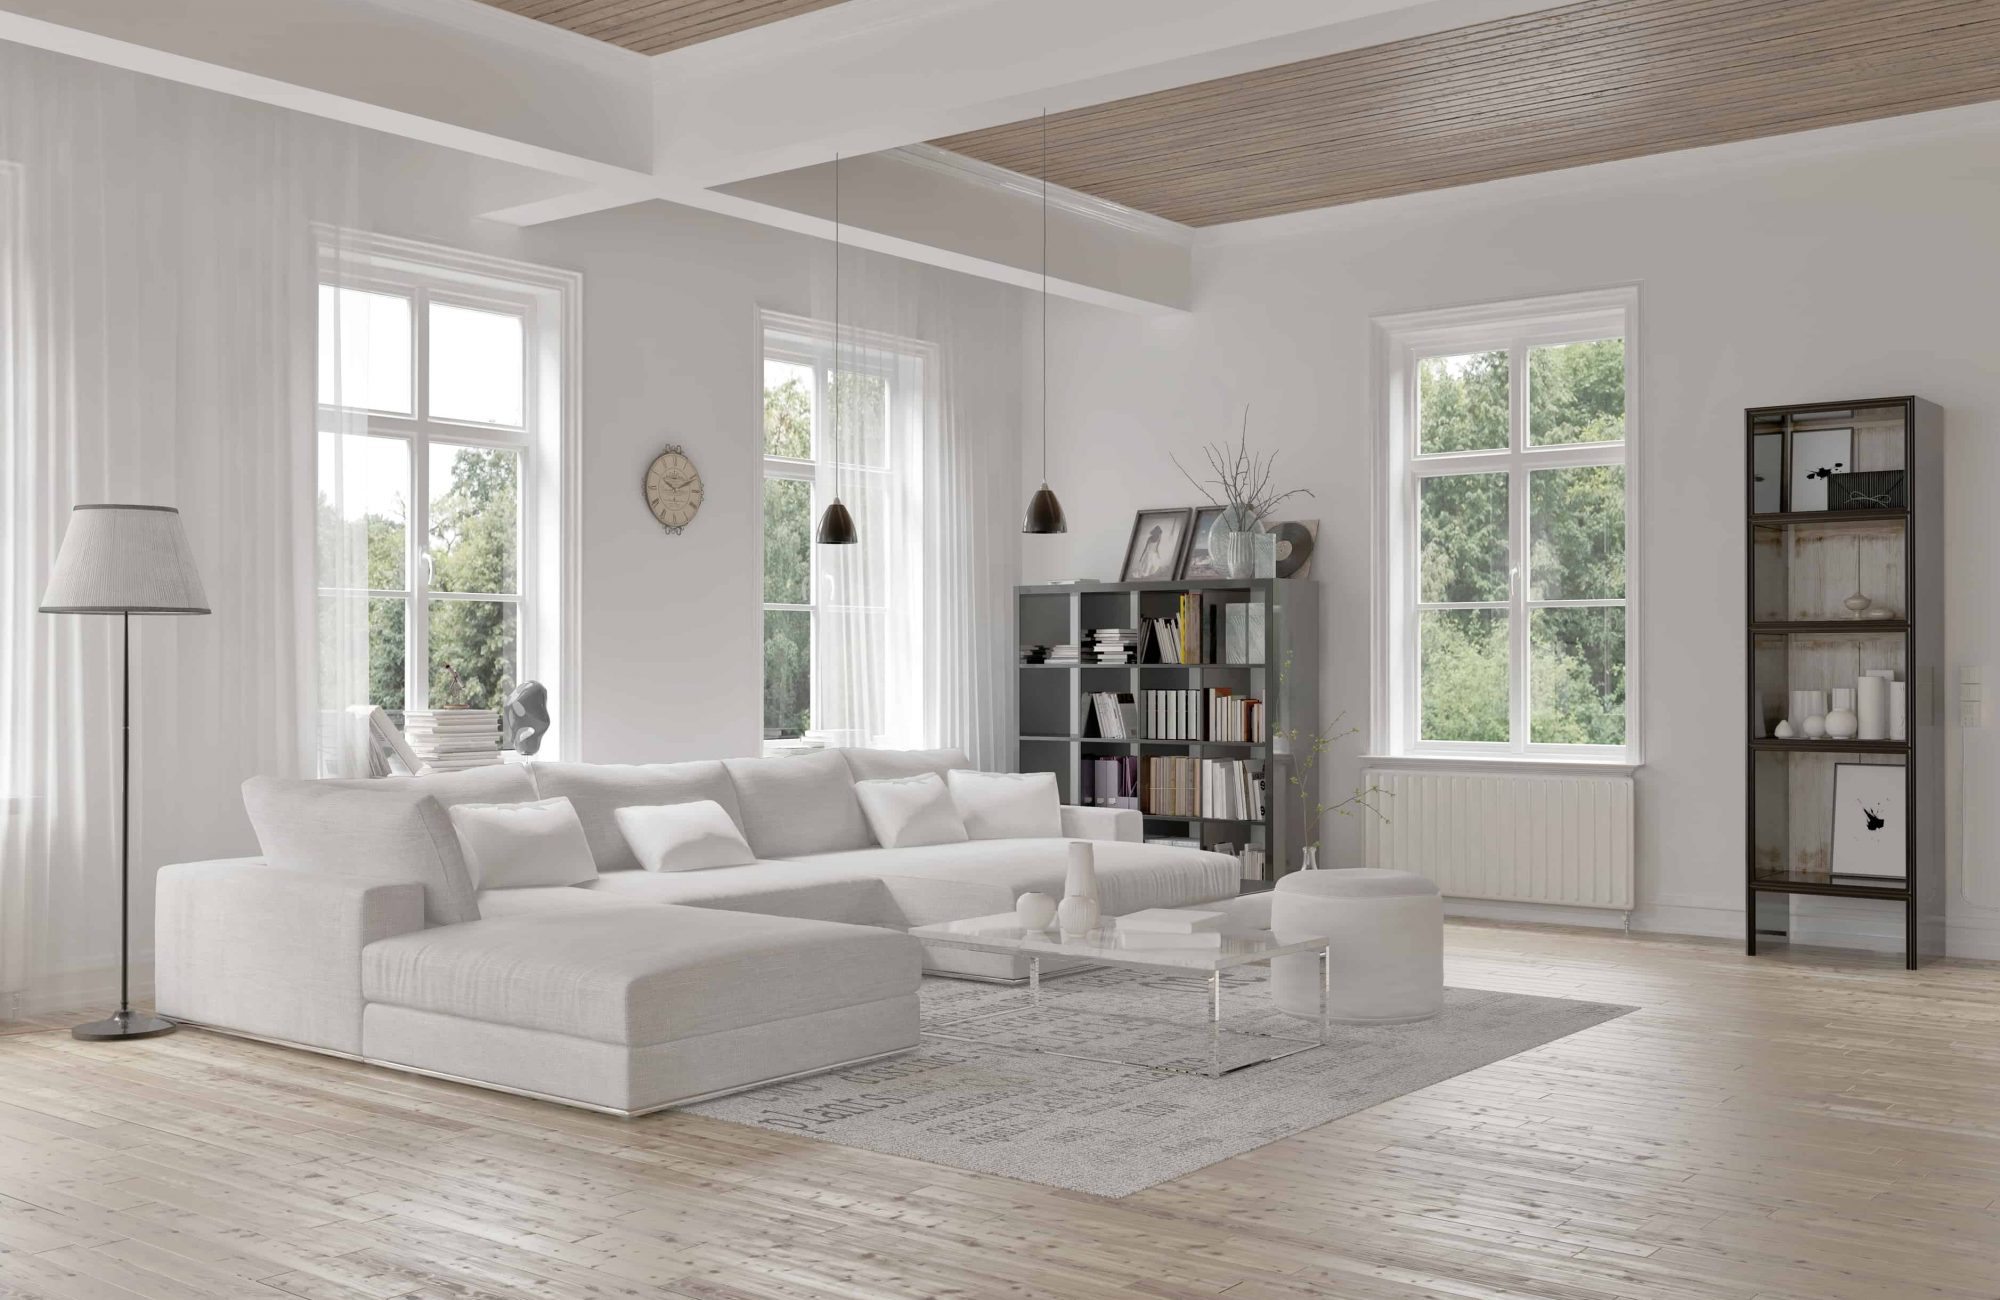 Modern loft living room interior with monochromatic white decor, a comfortable modular lounge suite and rug and accent bookcases with structural ceiling beams